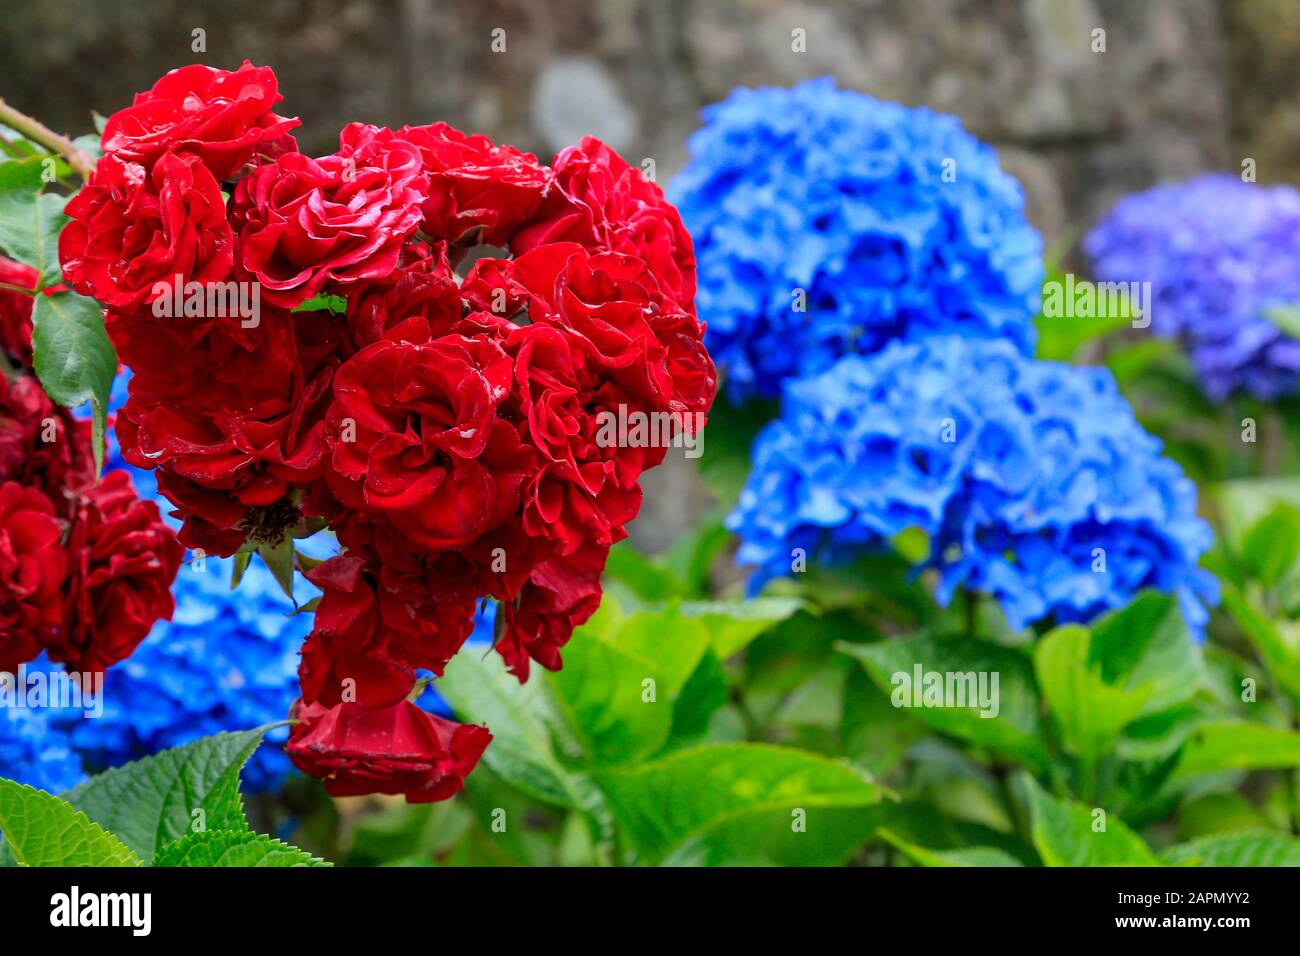 Red roses & blue Hydrangea flowers, close-up in full sun. Stock Photo